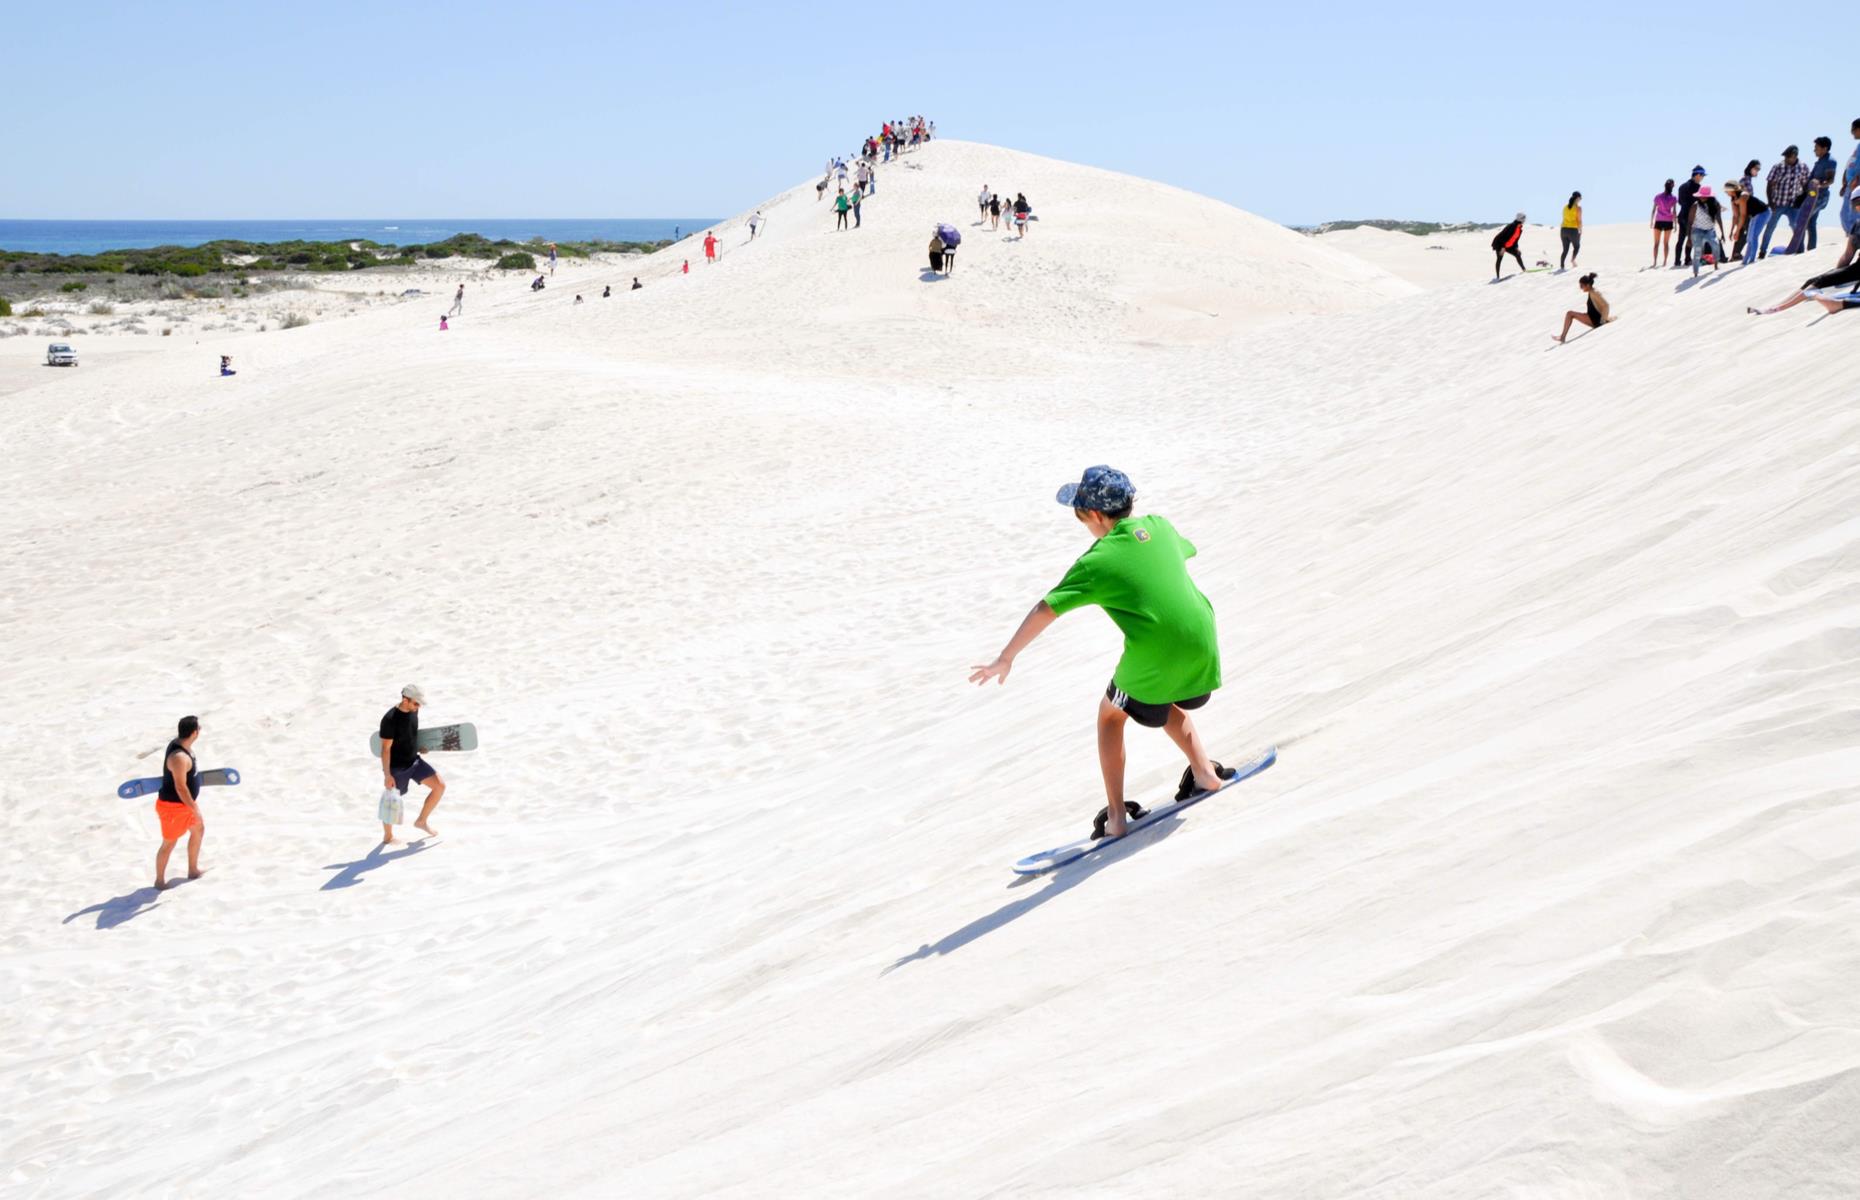 <p>Release your inner kid and whizz down <a href="https://www.lancelin.com.au/tourism/sandboarding/">the towering white sand dunes of Lancelin</a>, a coastal town to the north of Perth. You could join a group, of course, who will have all the kit, rent a board (for a small fee) or take your own for free. Watch the pros, then launch yourself down (it’s best for beginners to sit rather than stand). Don't forget your sunglasses, to stop the glare and sand getting in your eyes. If you’re not a fan of the sand, the seaside town is famed for its surfing and wind surfing too. </p>